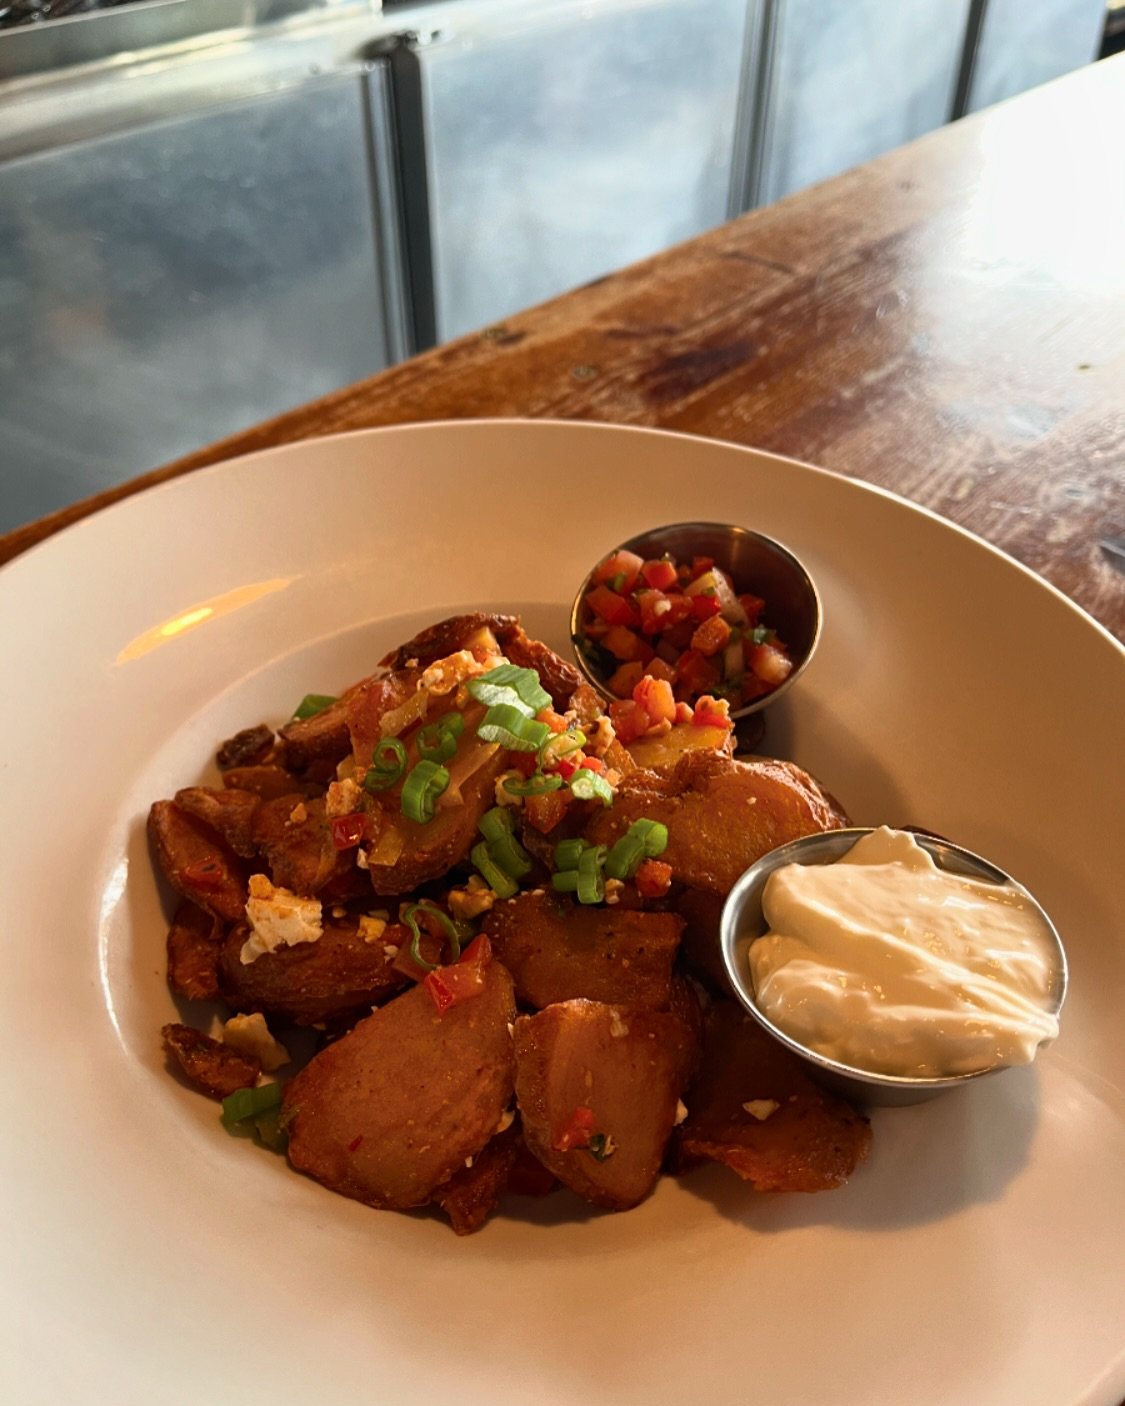 Dos Amigos Potato Appetizer 🌶️
&iexcl; new menu item alert ! 

Hand-cut potatoes tossed in chipotle, feta cheese, and topped with green onions &mdash; served with Tipper salsa and sour cream